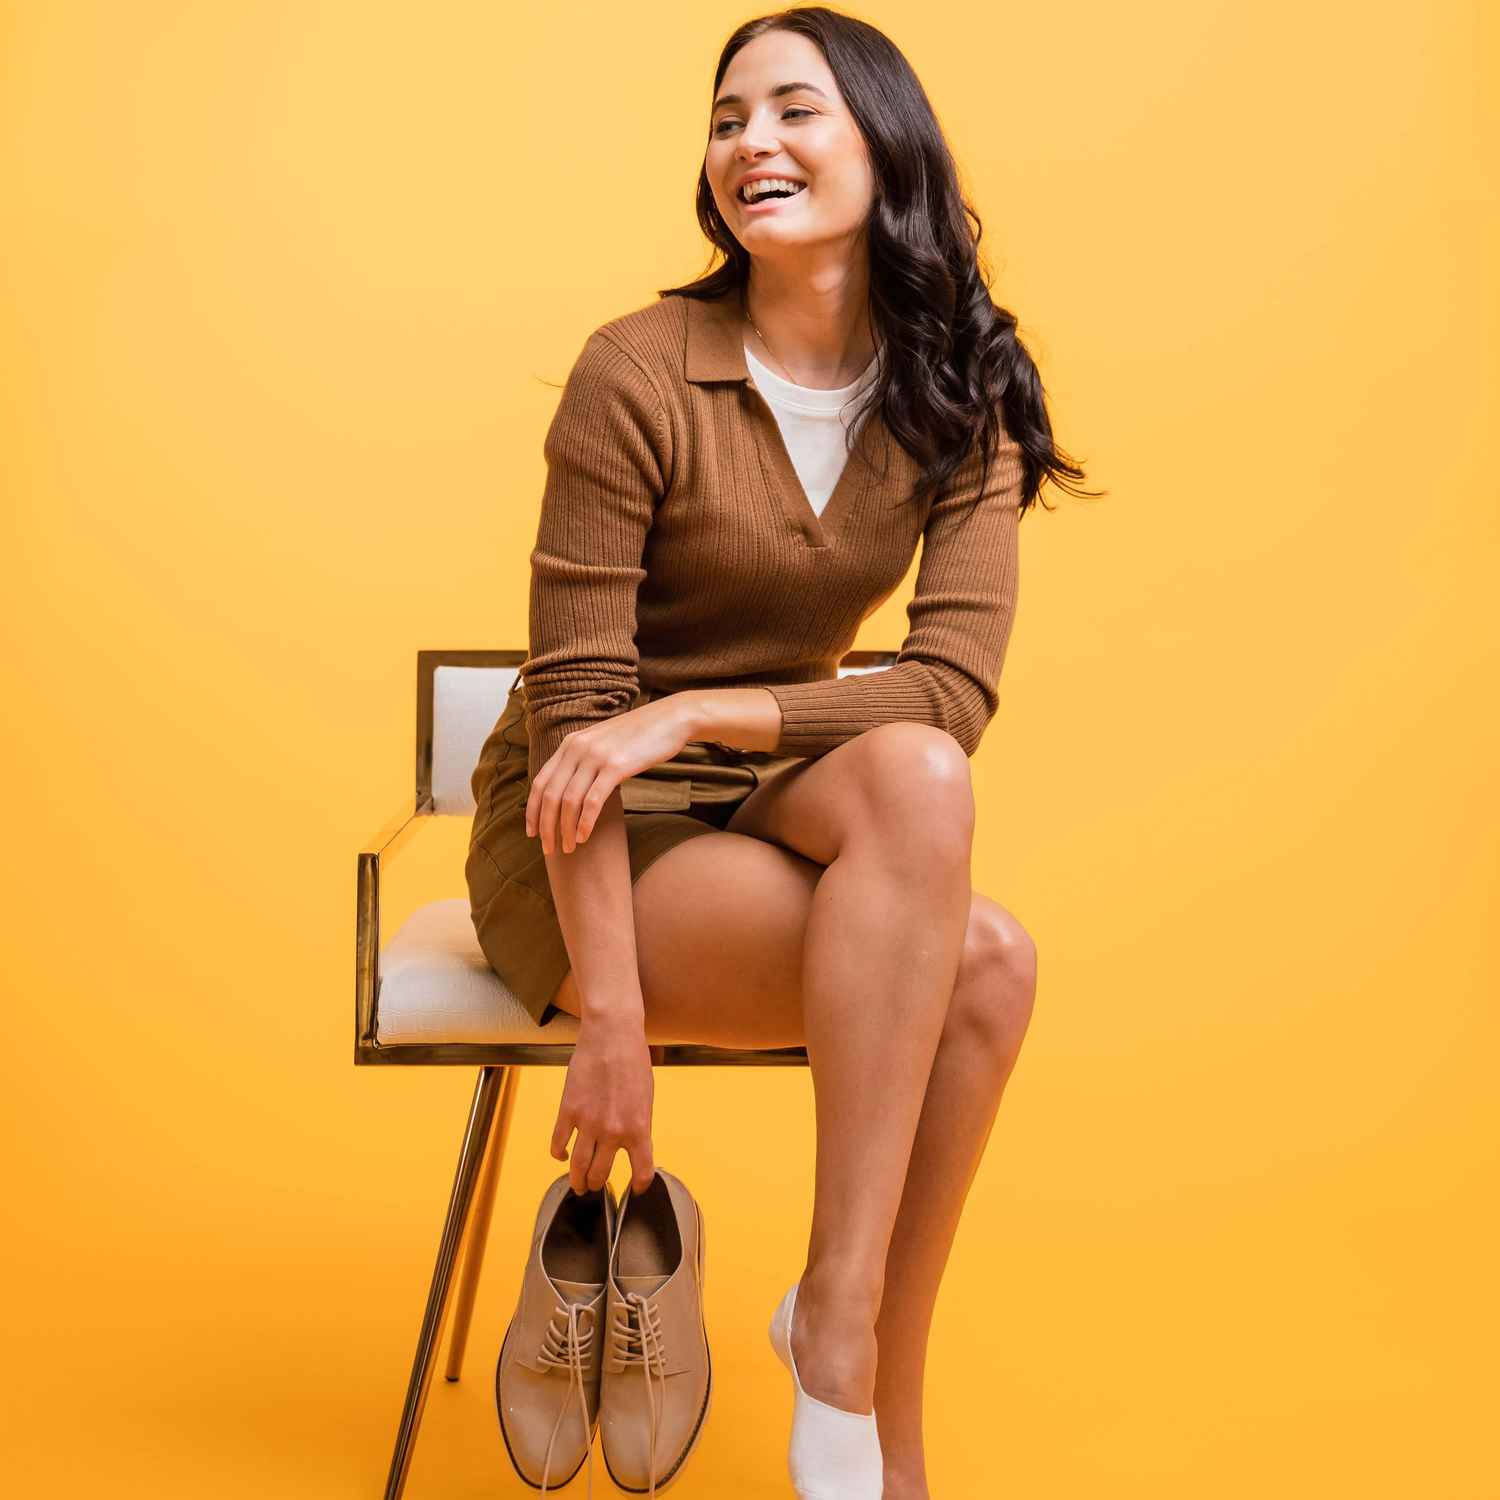 A woman is laughing while sitting on a chair and holding her shoes.